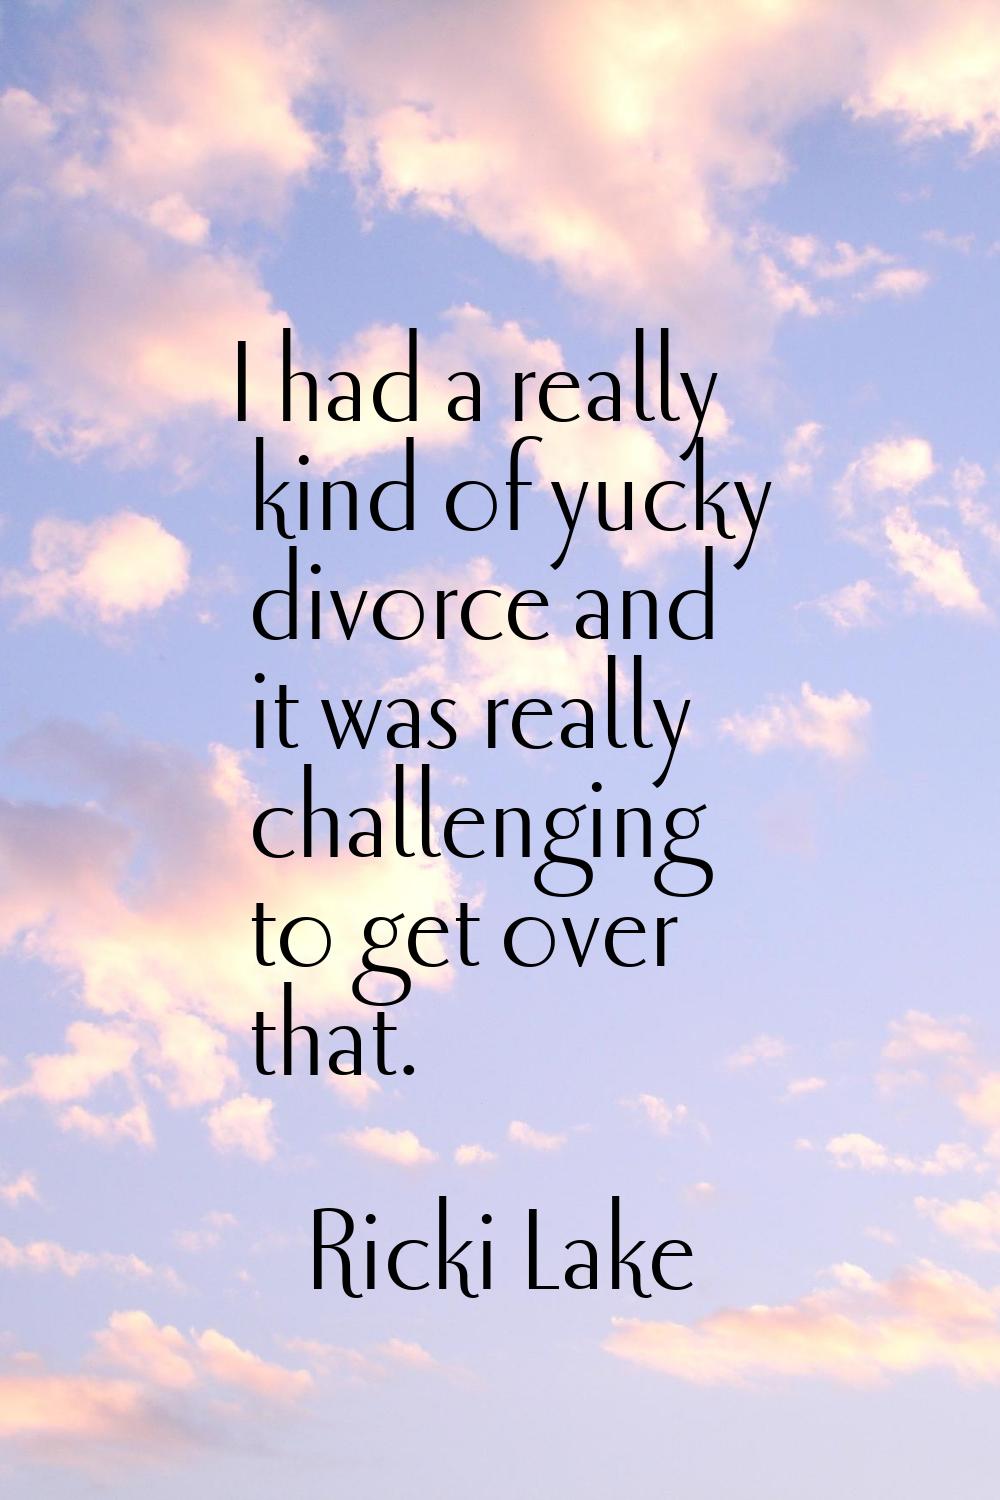 I had a really kind of yucky divorce and it was really challenging to get over that.